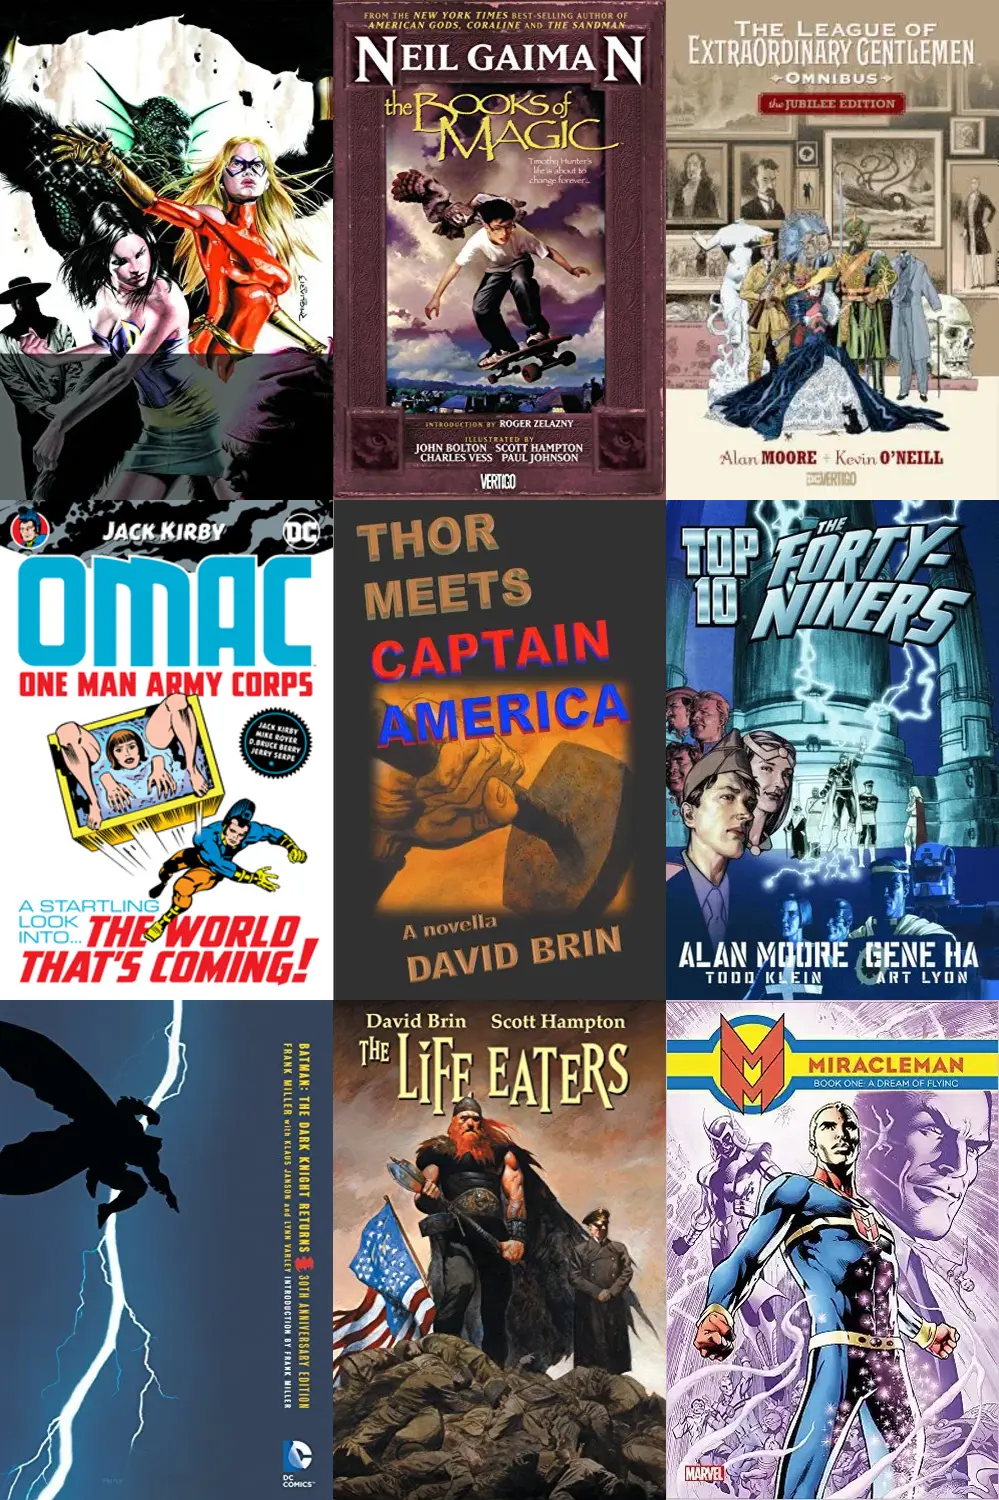 liked Top The Forty-Niners by Alan Moore, what should I read